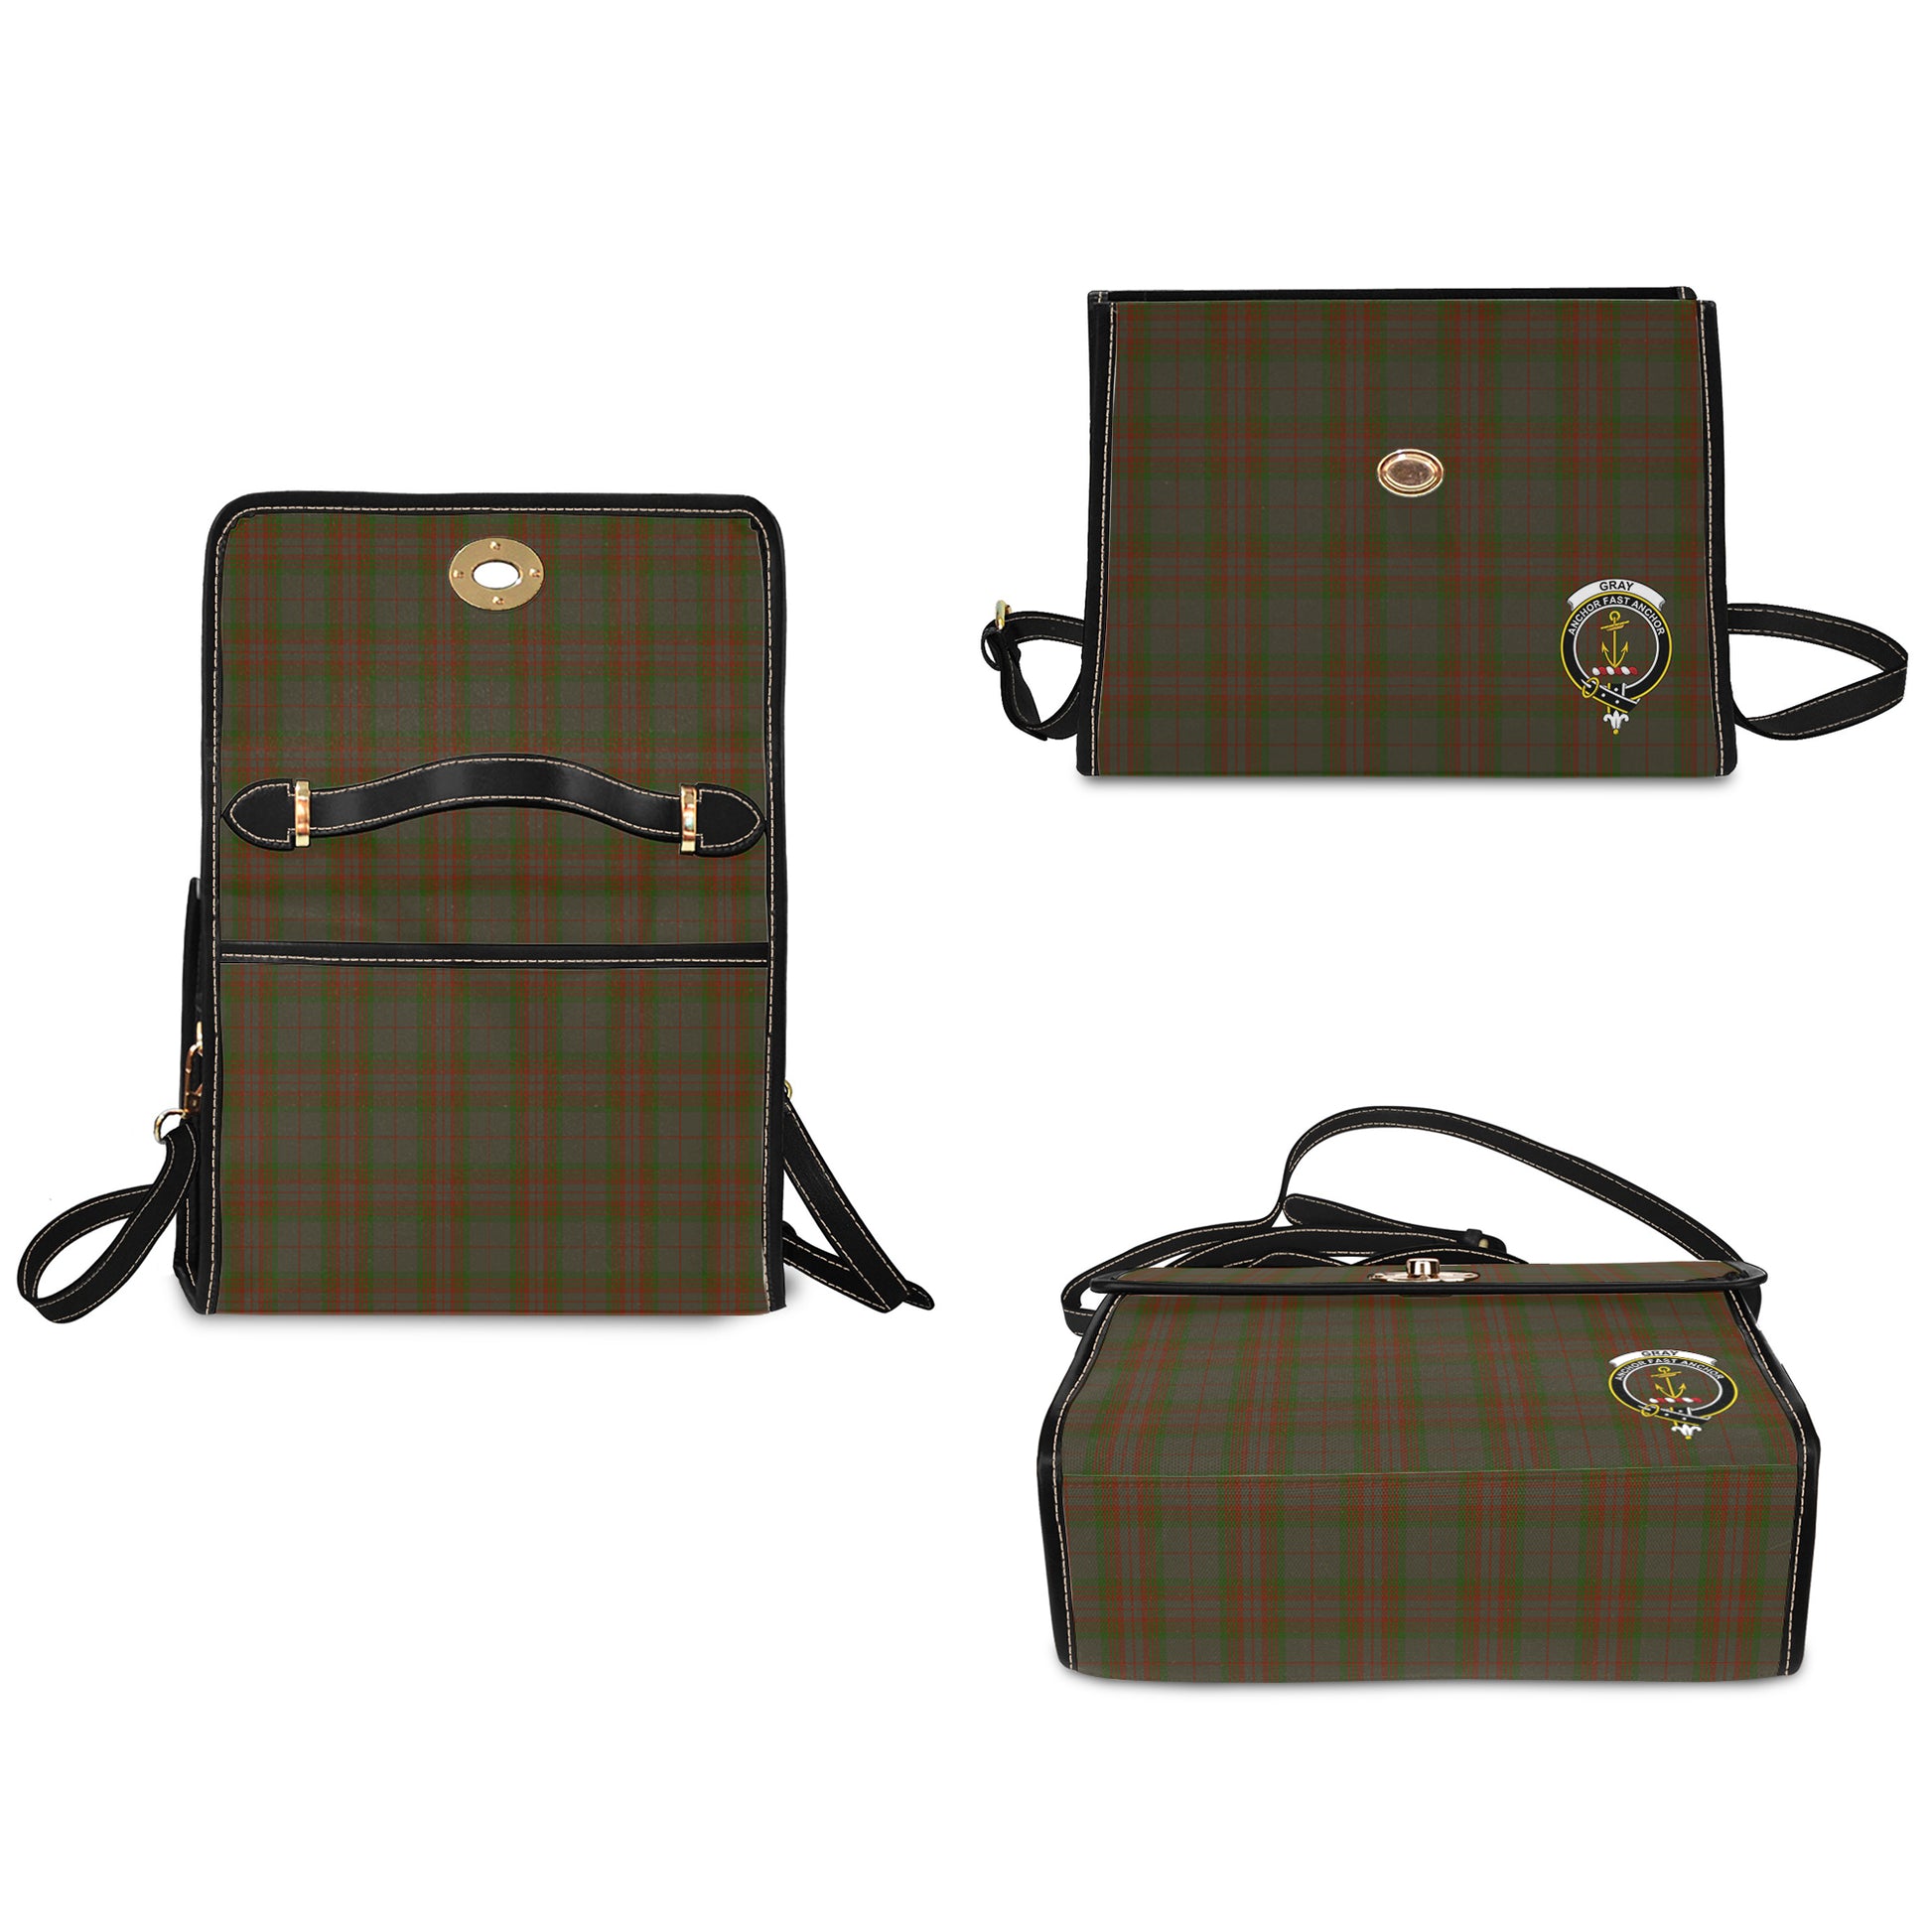 gray-tartan-leather-strap-waterproof-canvas-bag-with-family-crest